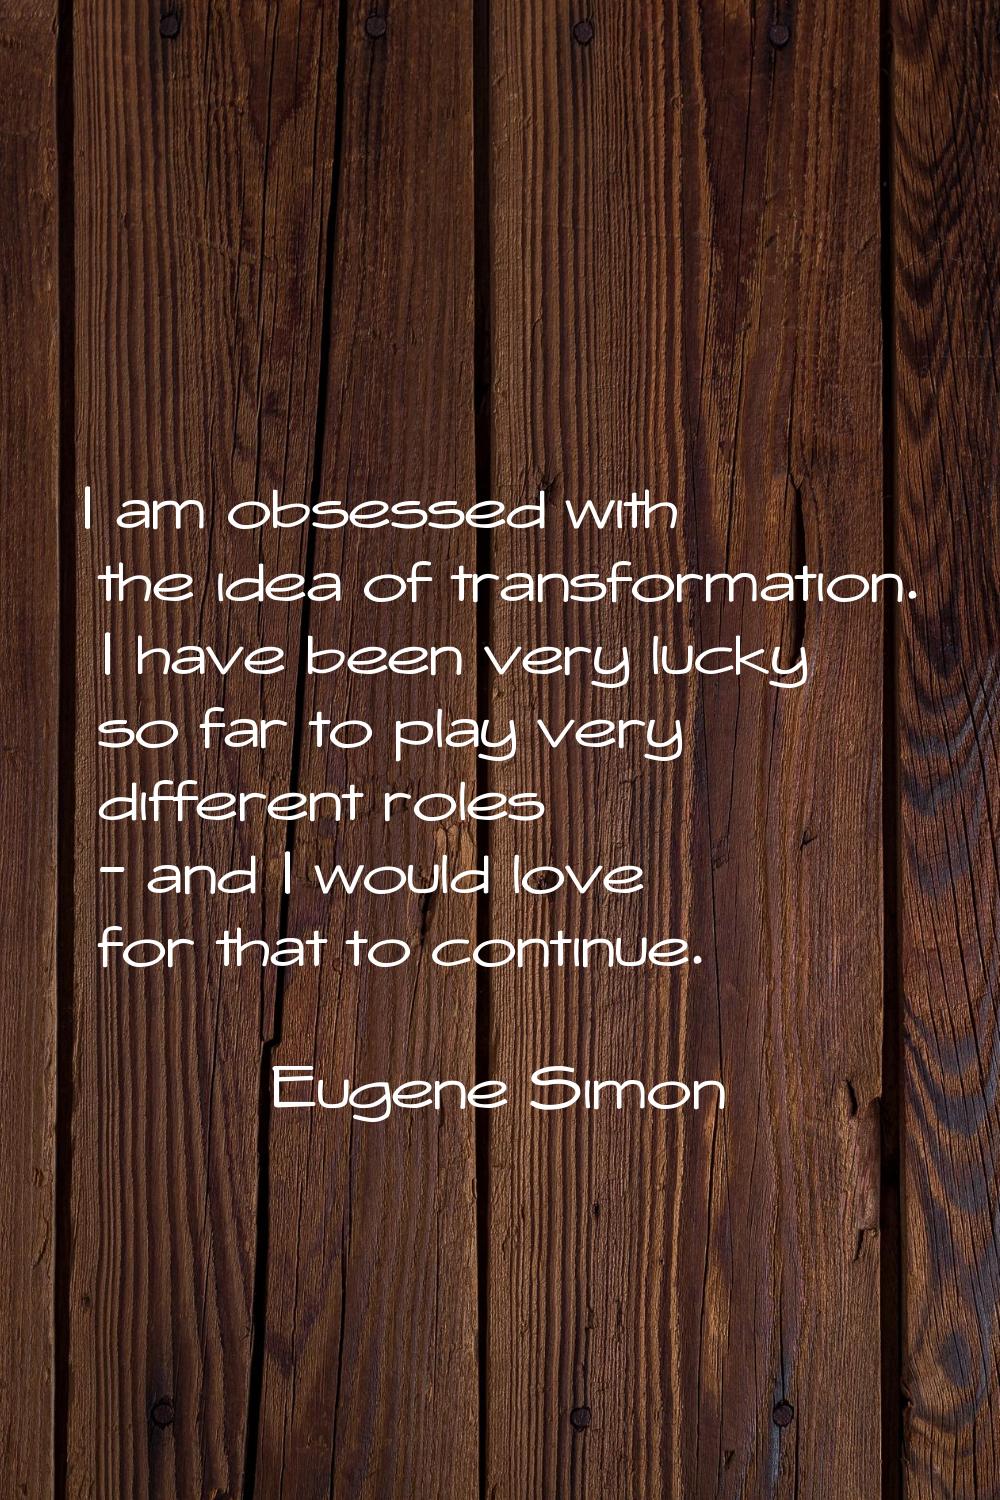 I am obsessed with the idea of transformation. I have been very lucky so far to play very different